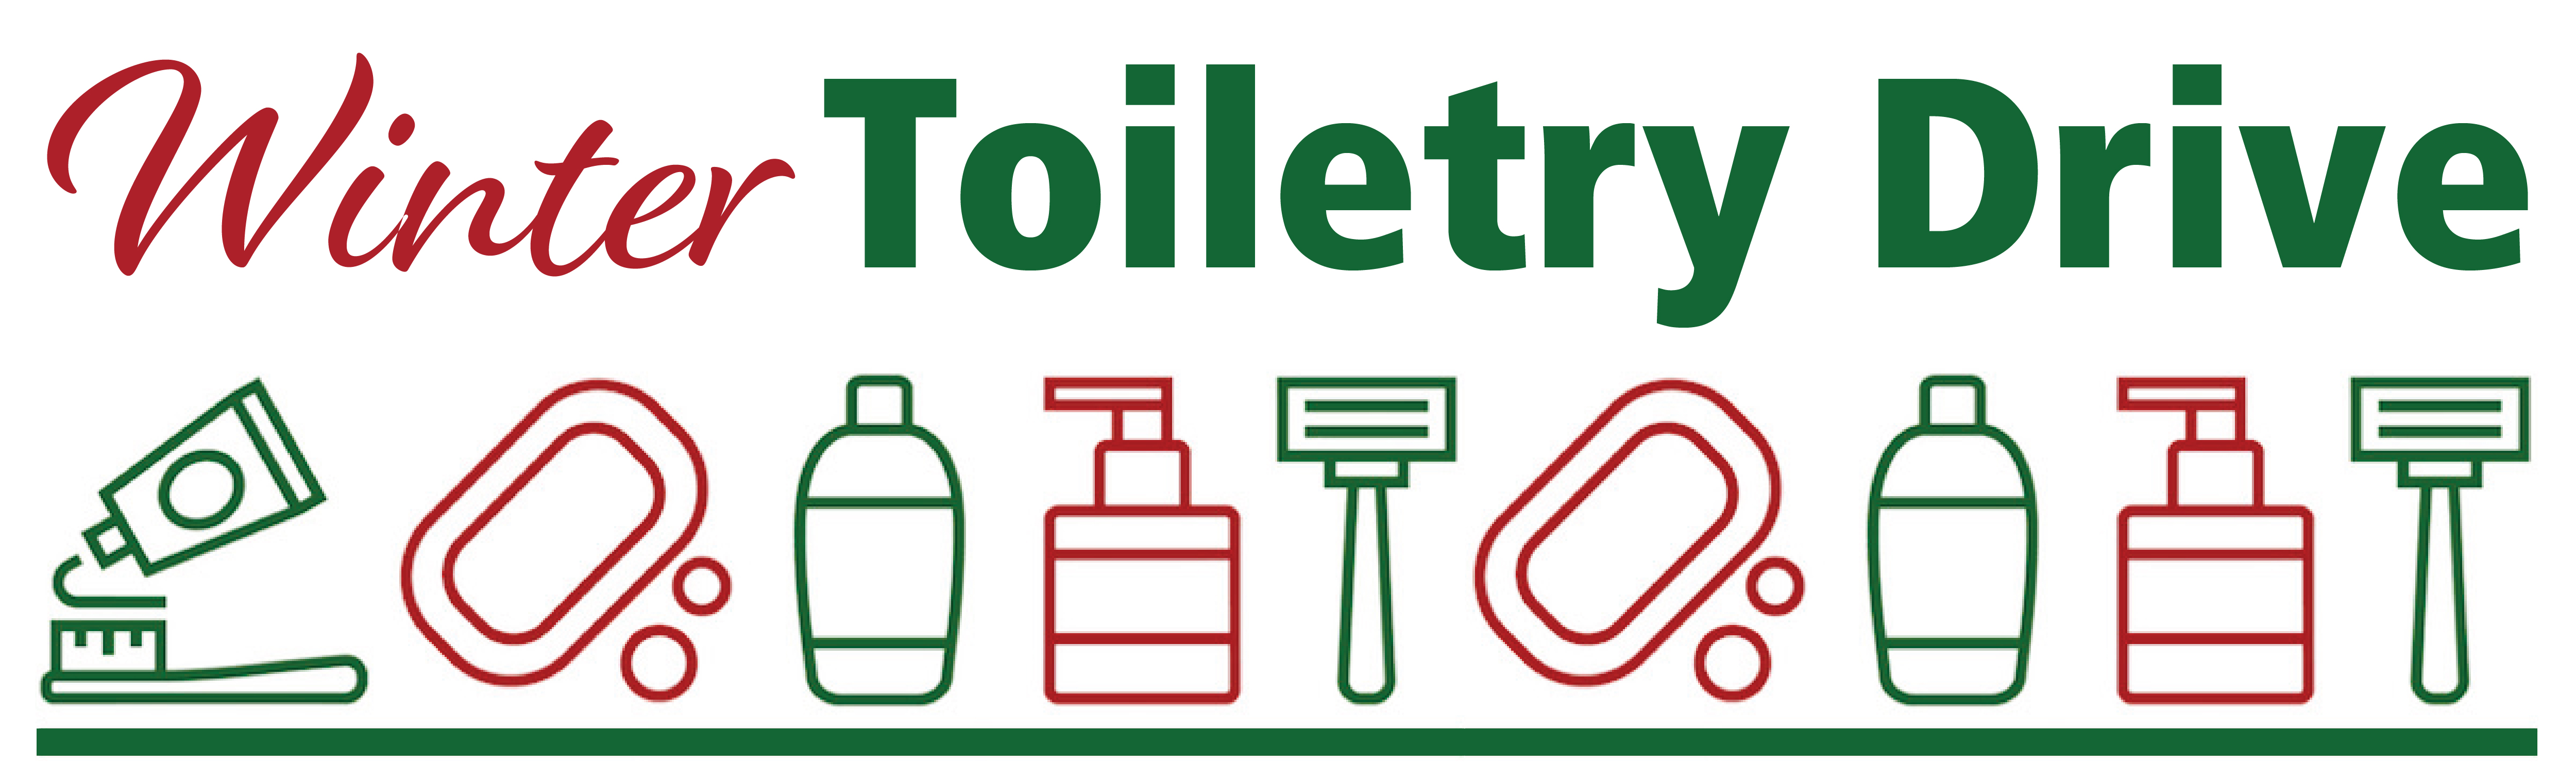 Winter Toiletry Drive (2018), Fountaindale Public Library